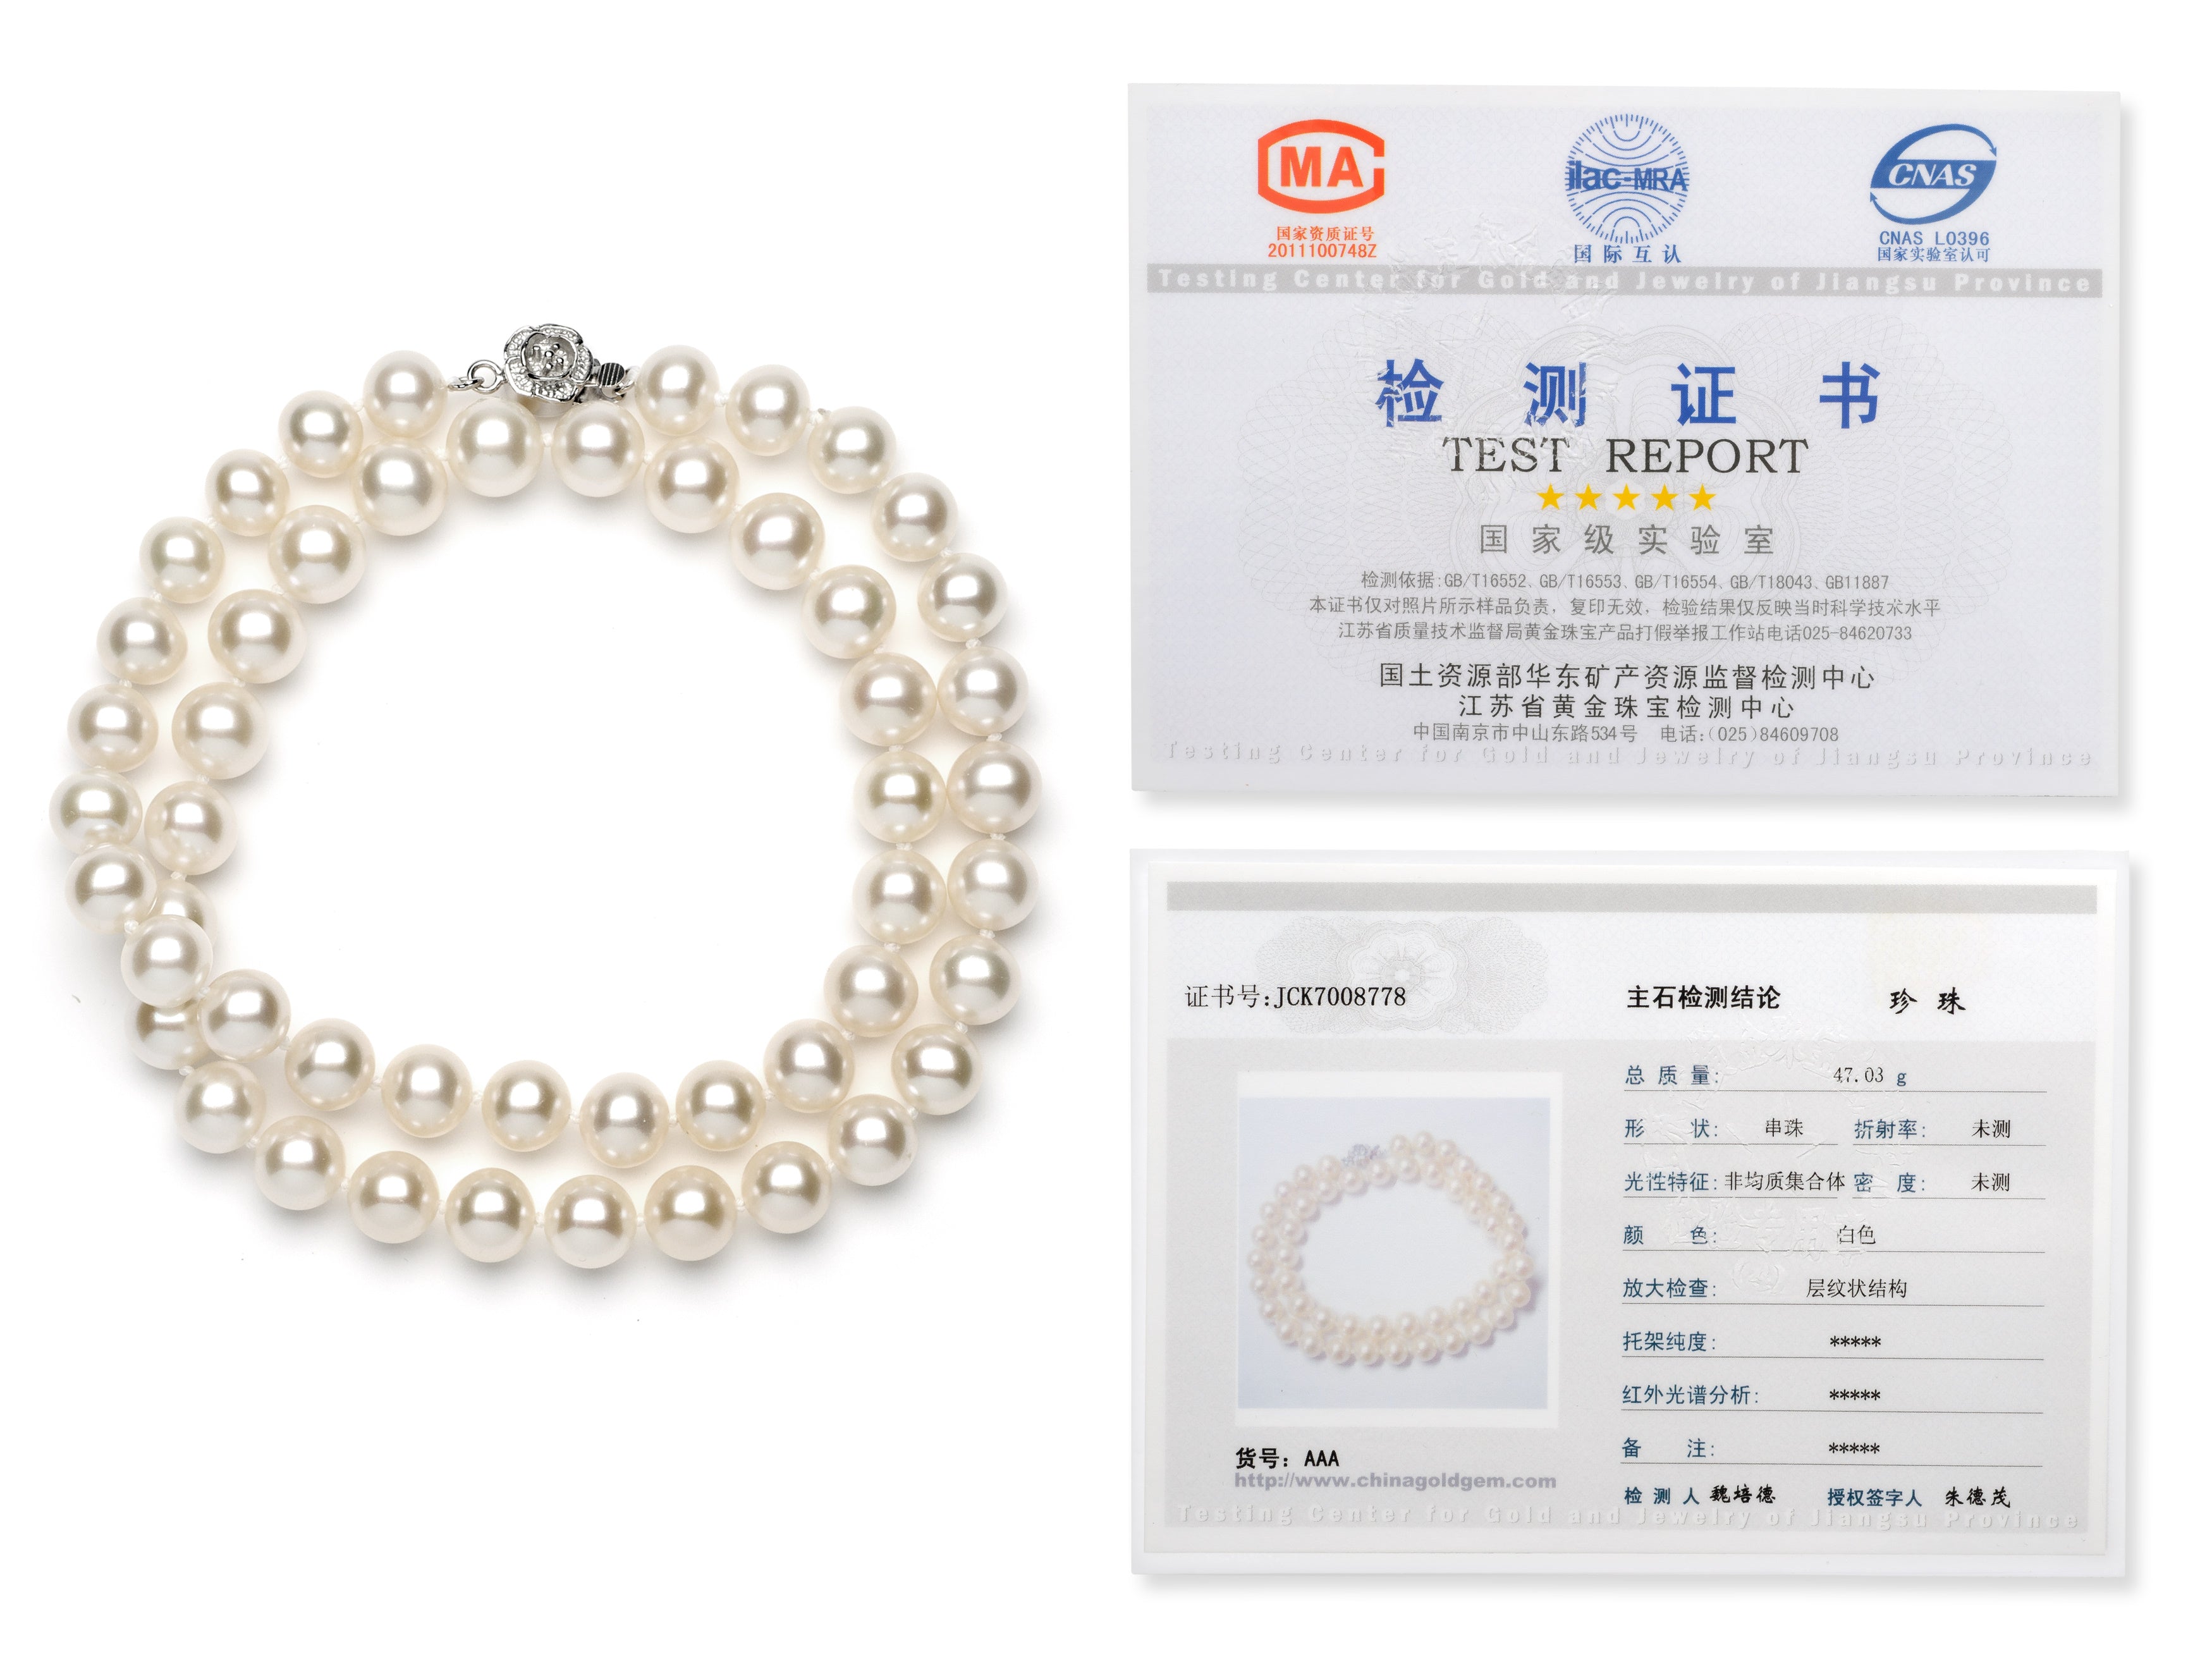 8.0-9.0 mm White Freshwater Pearl Necklace